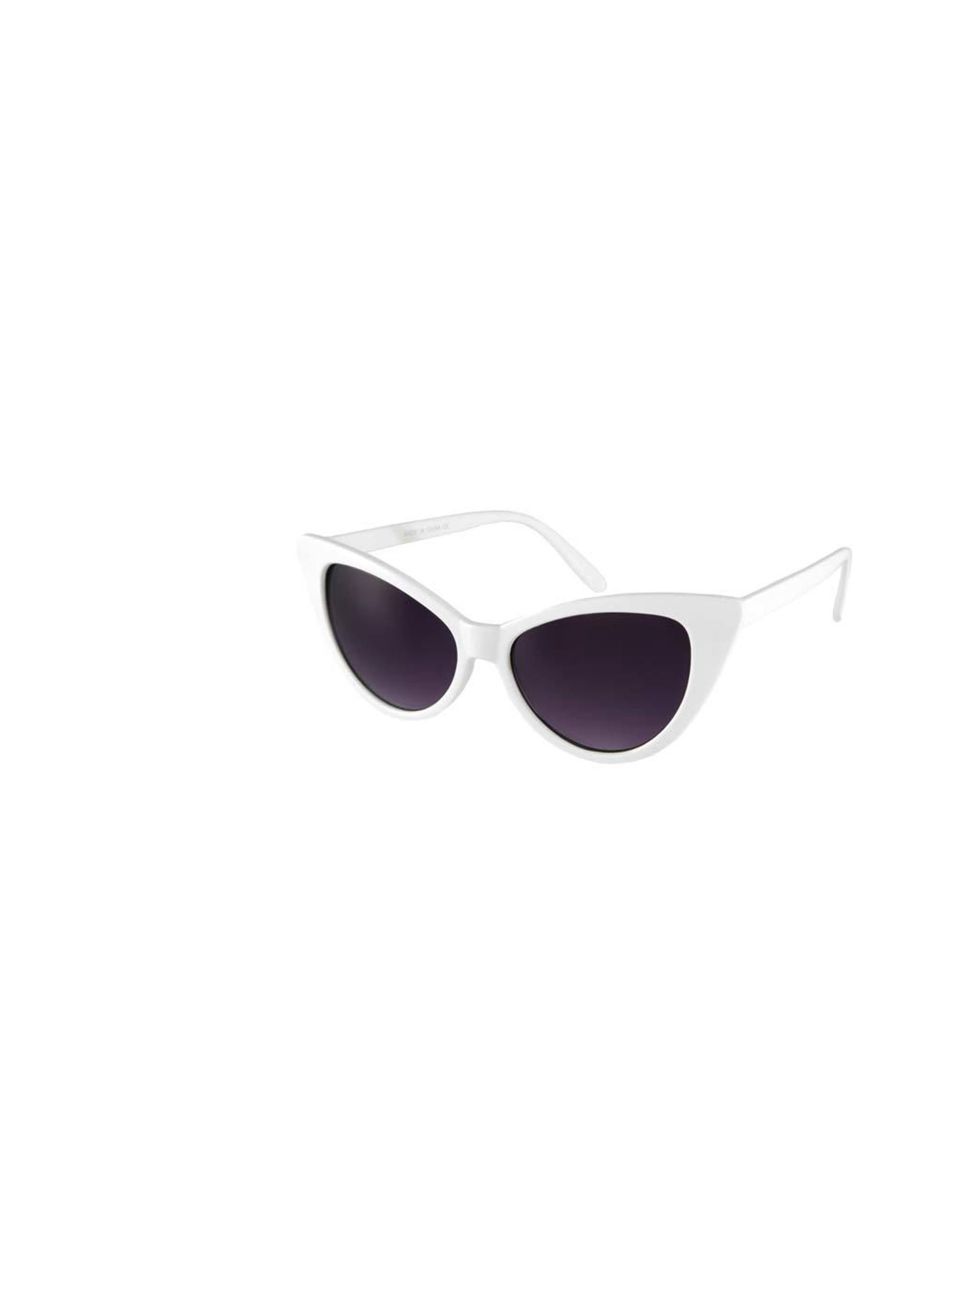 <p>These Asos white sunglasses add the perfect touch to this outfit, £10 at <a href="http://www.asos.com/ASOS/ASOS-Cat-Eye-Sunglasses/Prod/pgeproduct.aspx?iid=2723431&amp;cid=4545&amp;Rf-200=5&amp;sh=0&amp;pge=0&amp;pgesize=20&amp;sort=-1&amp;clr=White">A